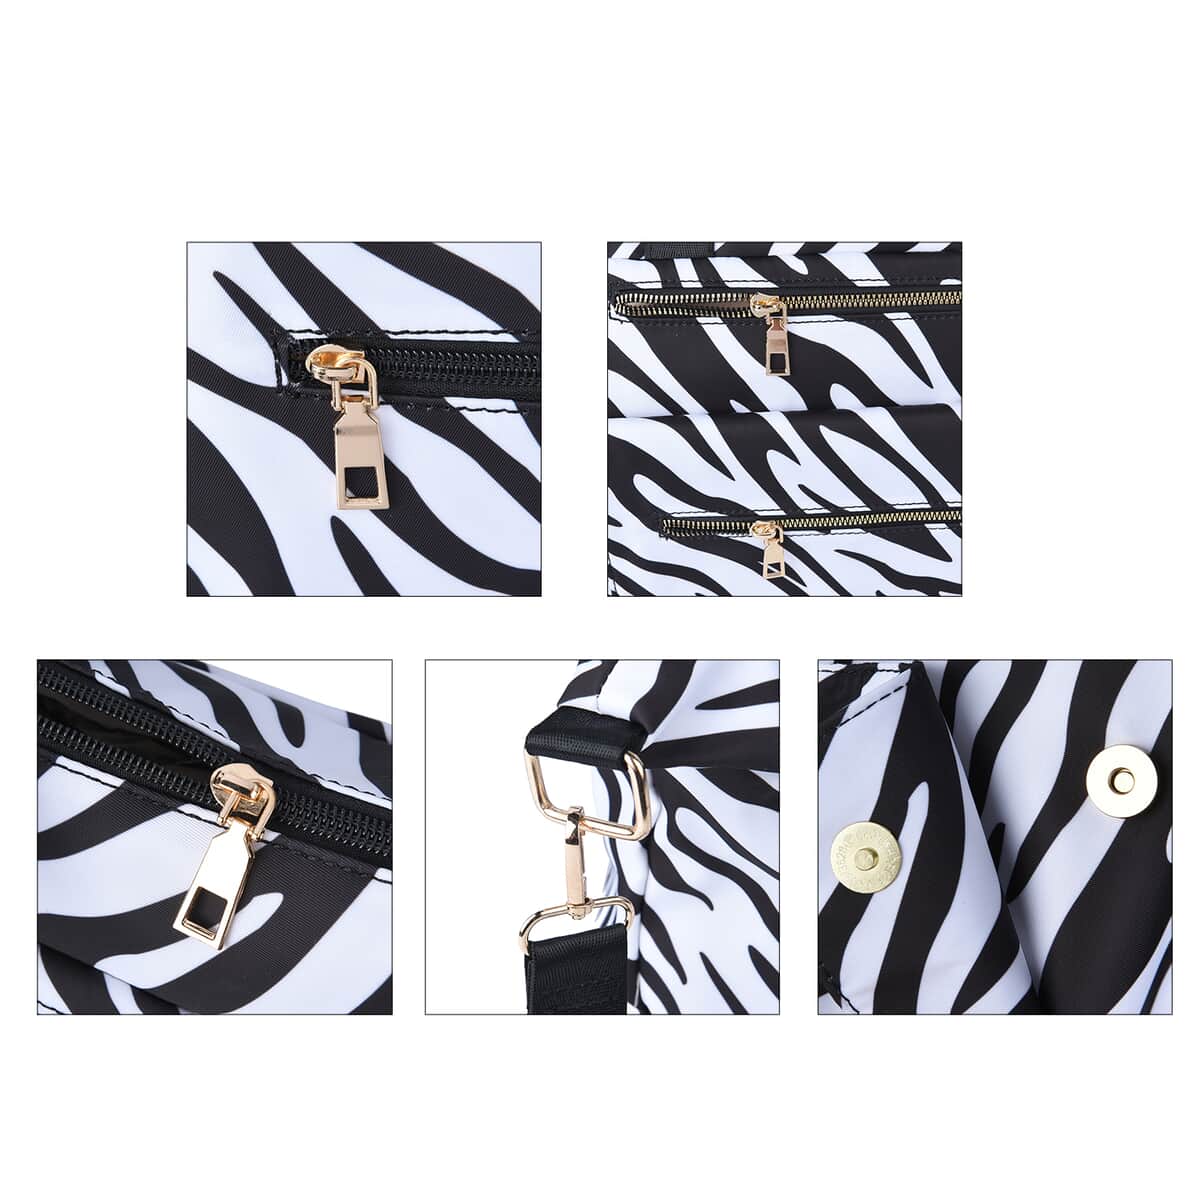 Black Color White Zebra Pattern Nylon Convertible Bag (12"x4"x11.5") with Handle and Shoulder Strap image number 4